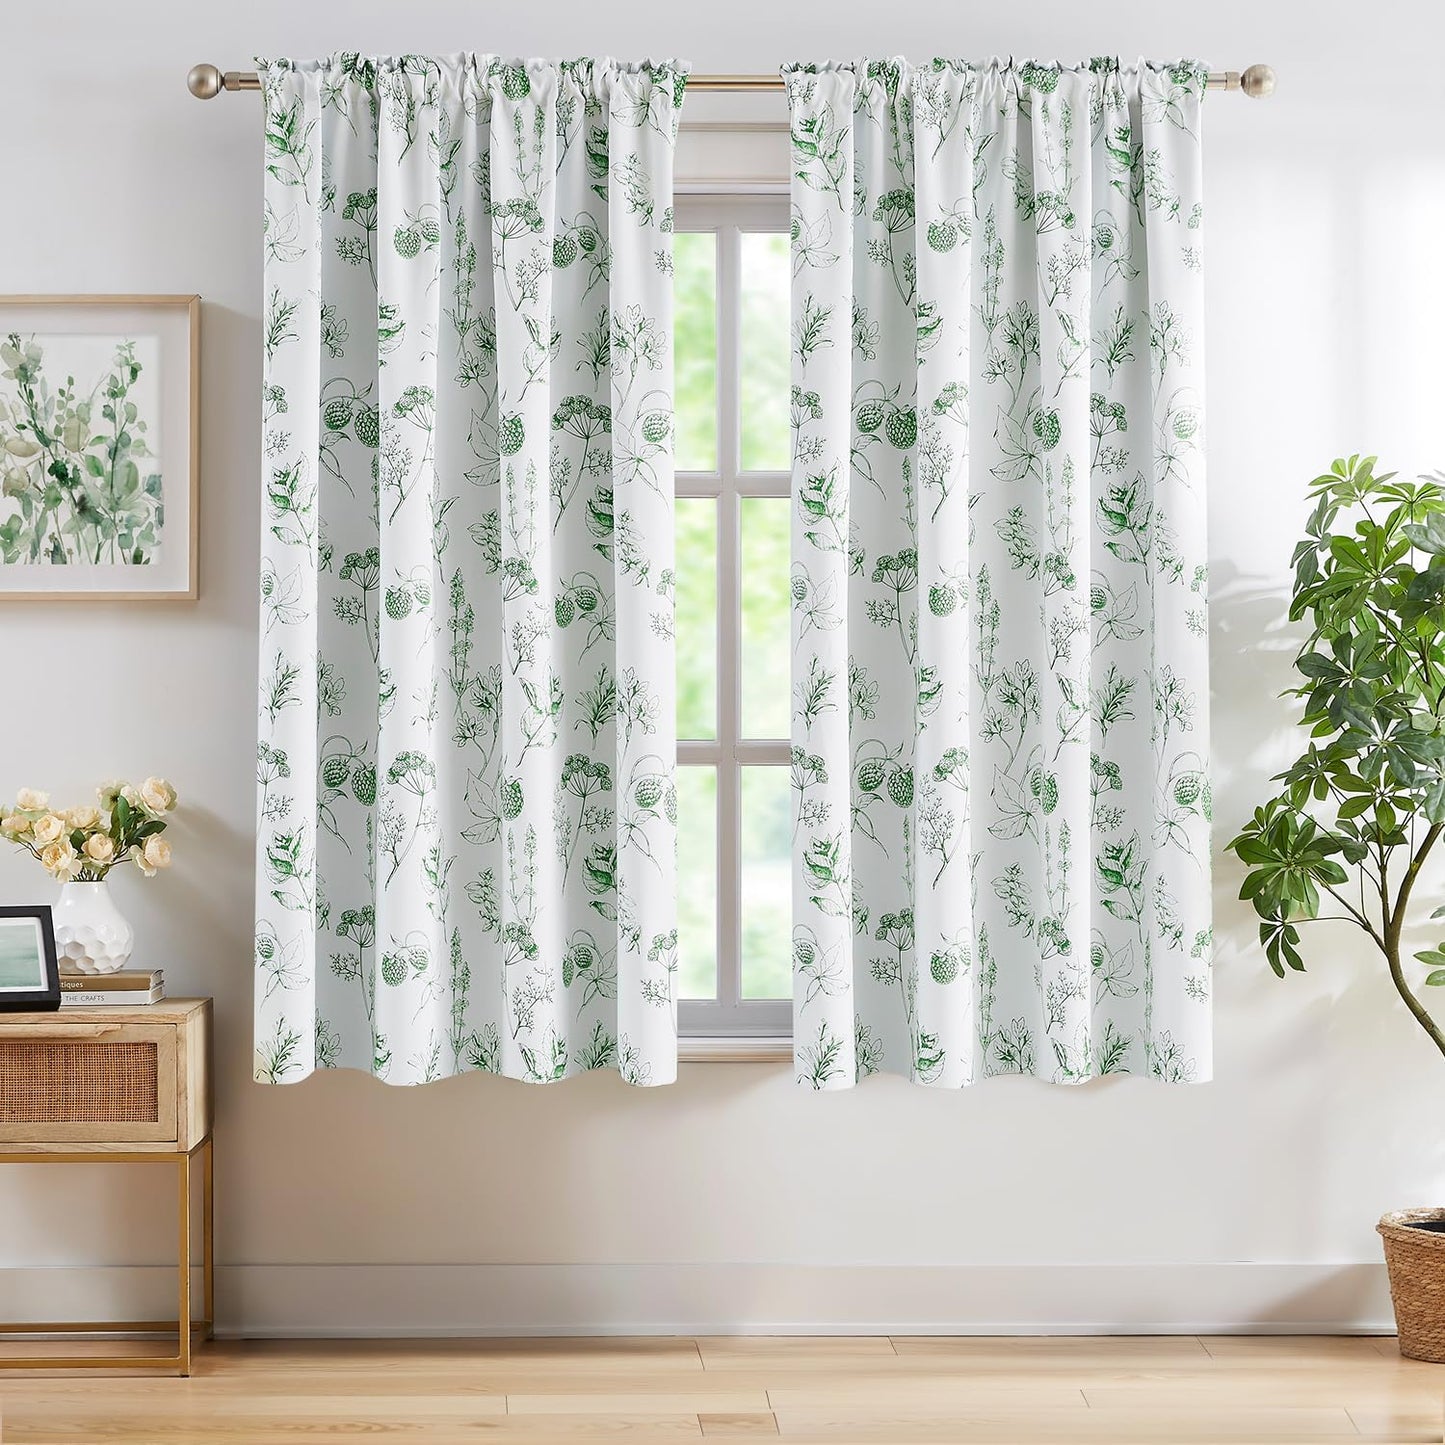 White Grey Blackout Curtains for Bedroom 84 Inch Length Floral Printed Living Room Curtain Panels for Farmhouse Décor Blossom Thermal Energy Efficient Light Blocking Window Curtain 50"W 2Pcs  Fmfunctex Lichi/ Green Blackout 50"W X 63"L 2Pcs 